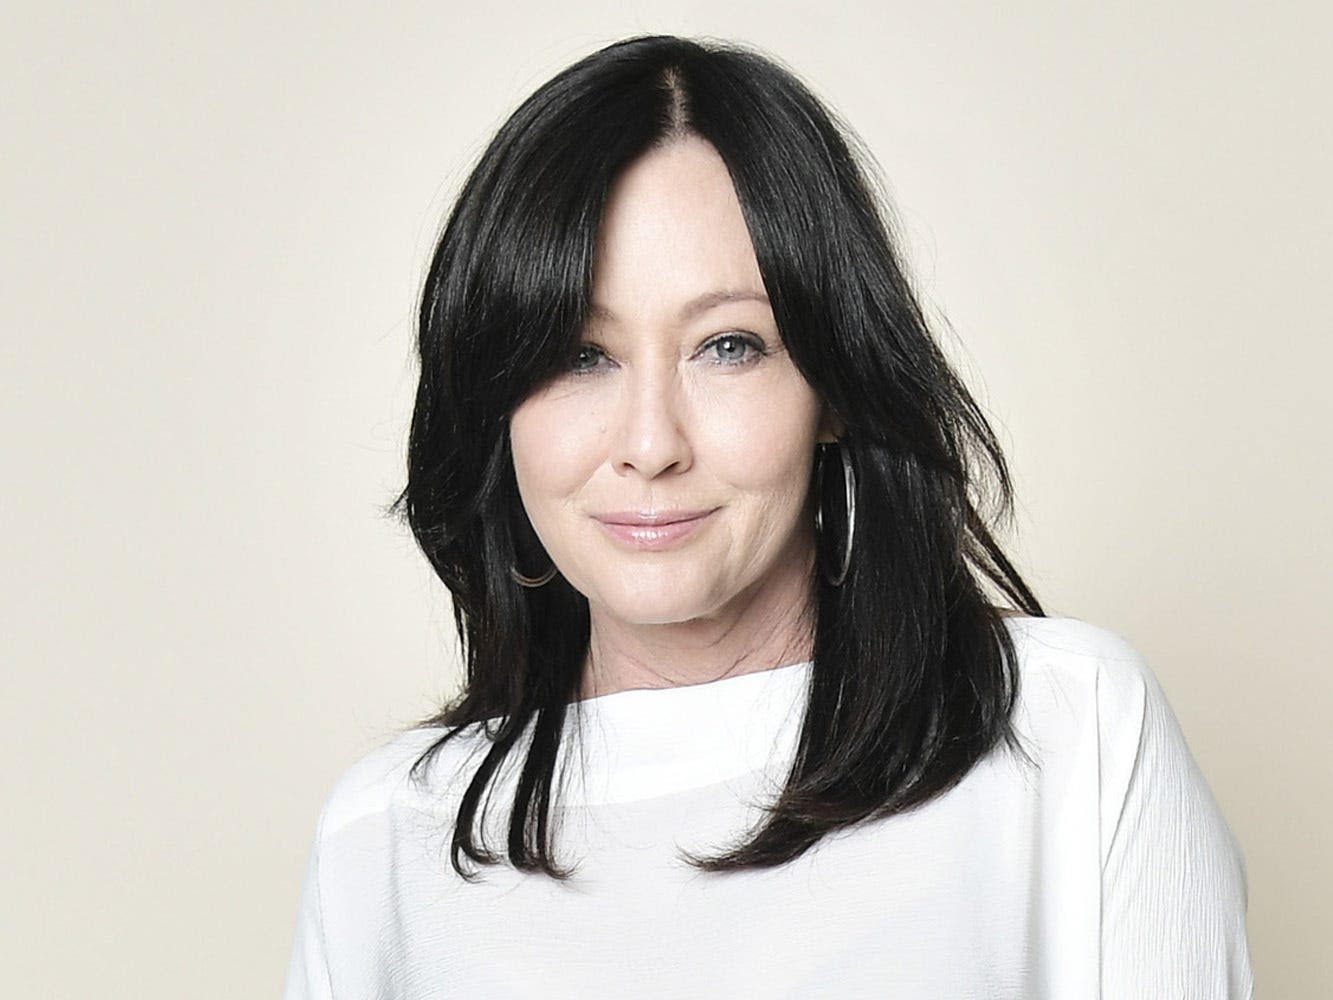 Shannen Doherty, 'Beverly Hills, 90210' and 'Charmed' star, dead at 53